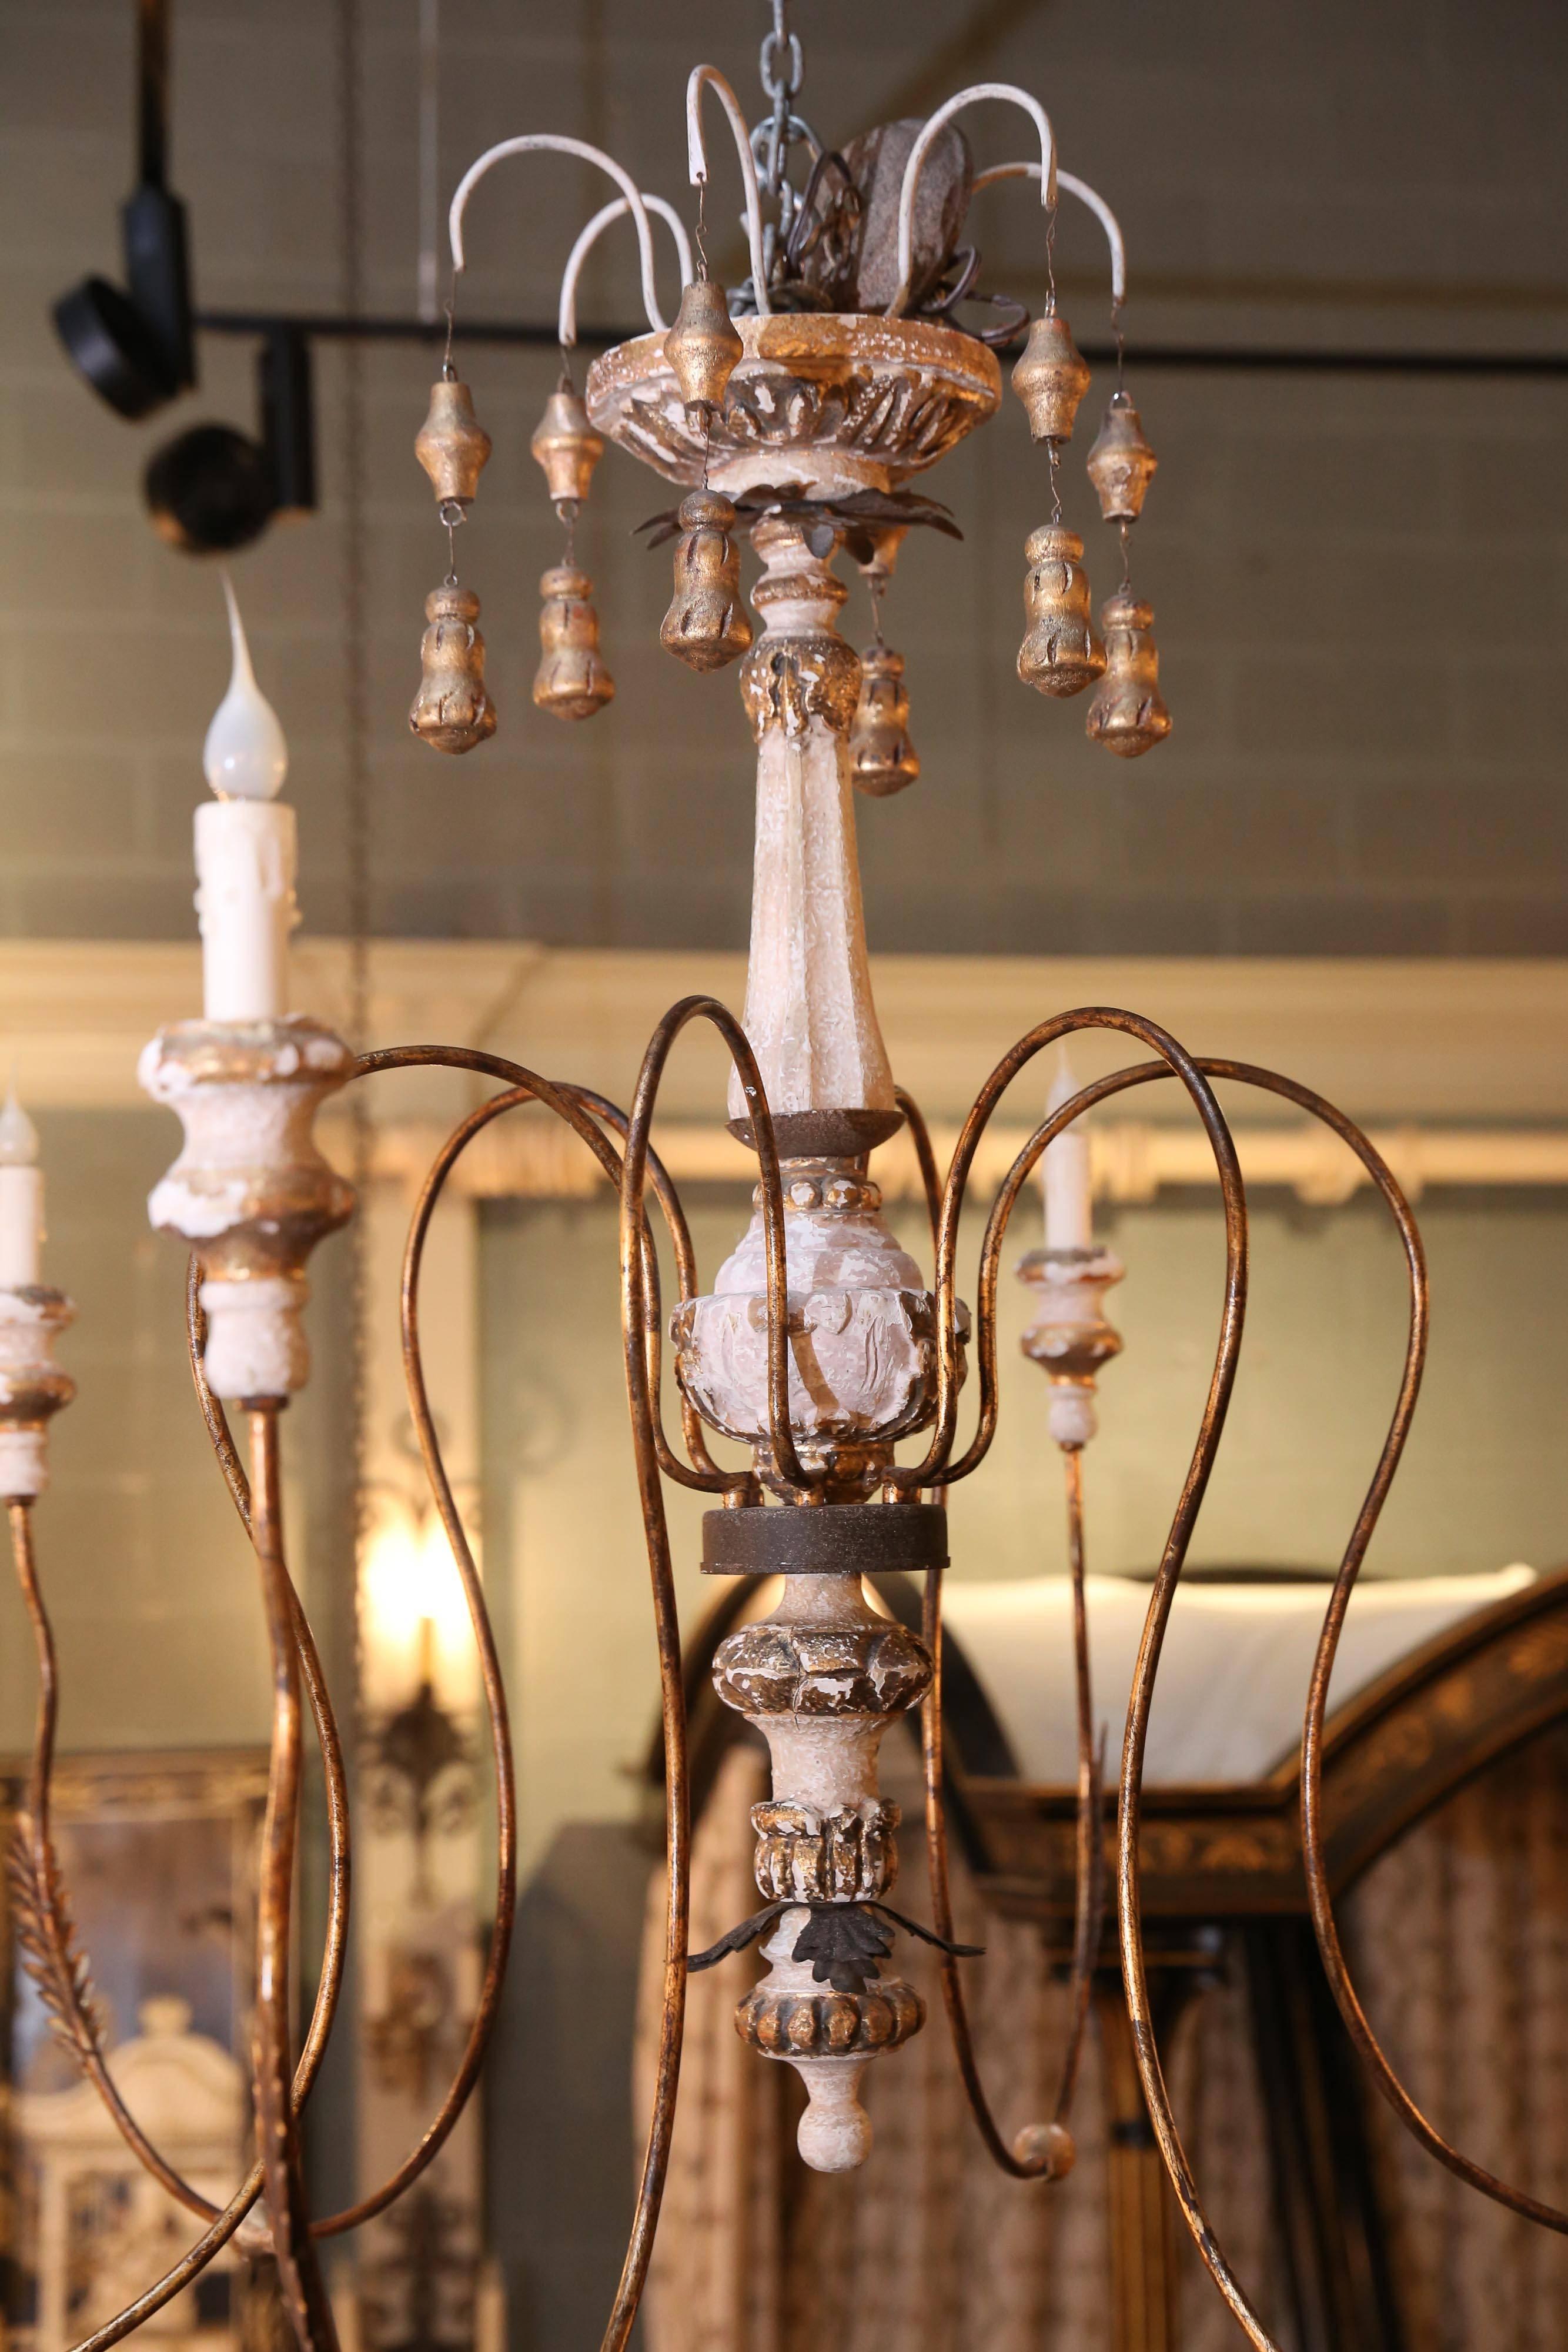 Six-light painted Swedish chandelier with turned wooden body, metal arms, and tassels.